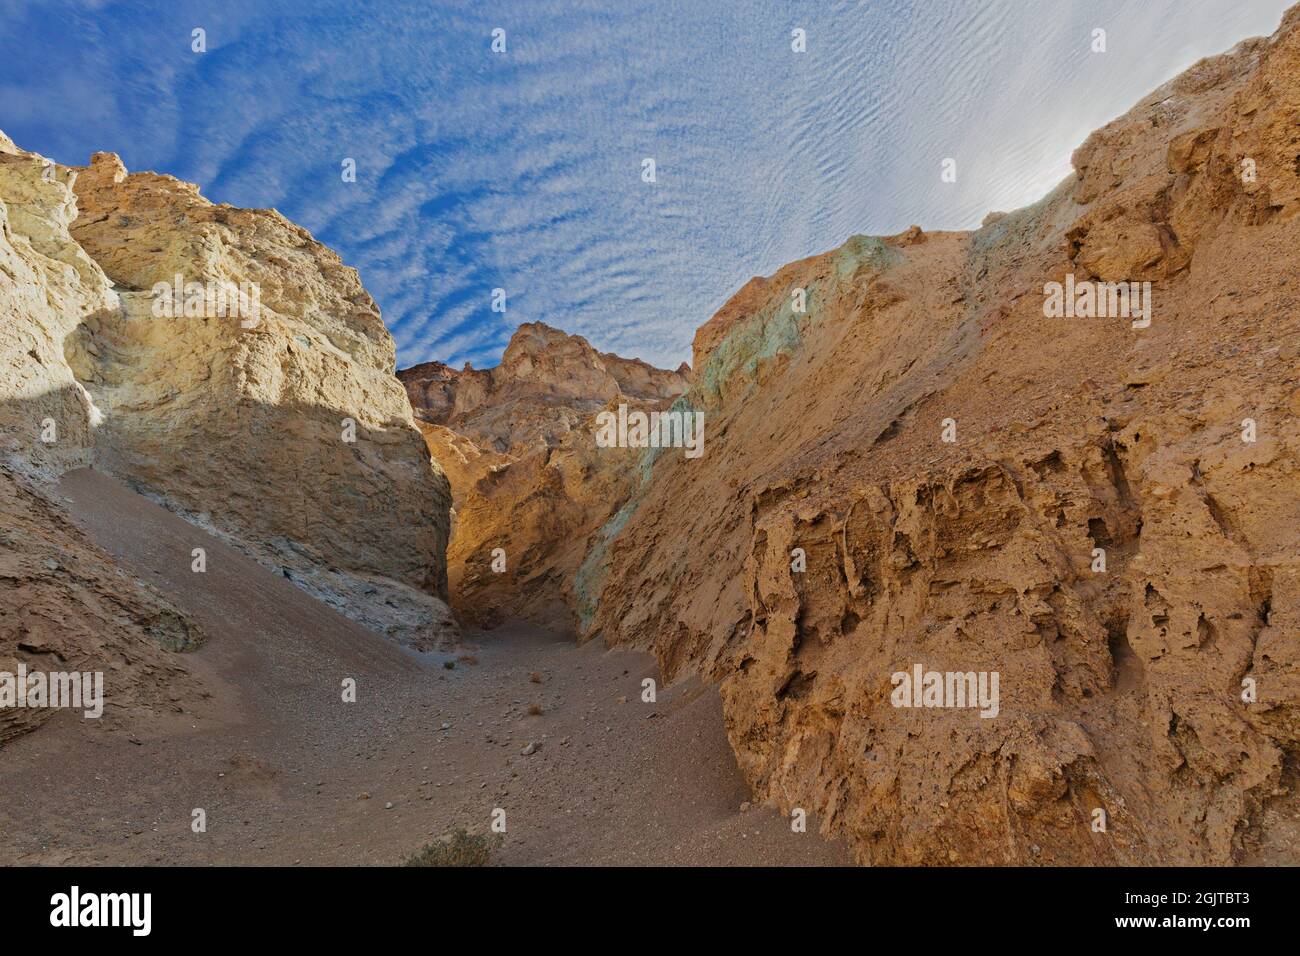 Desolation Canyon in Death Valley is anything but desolate. Stock Photo